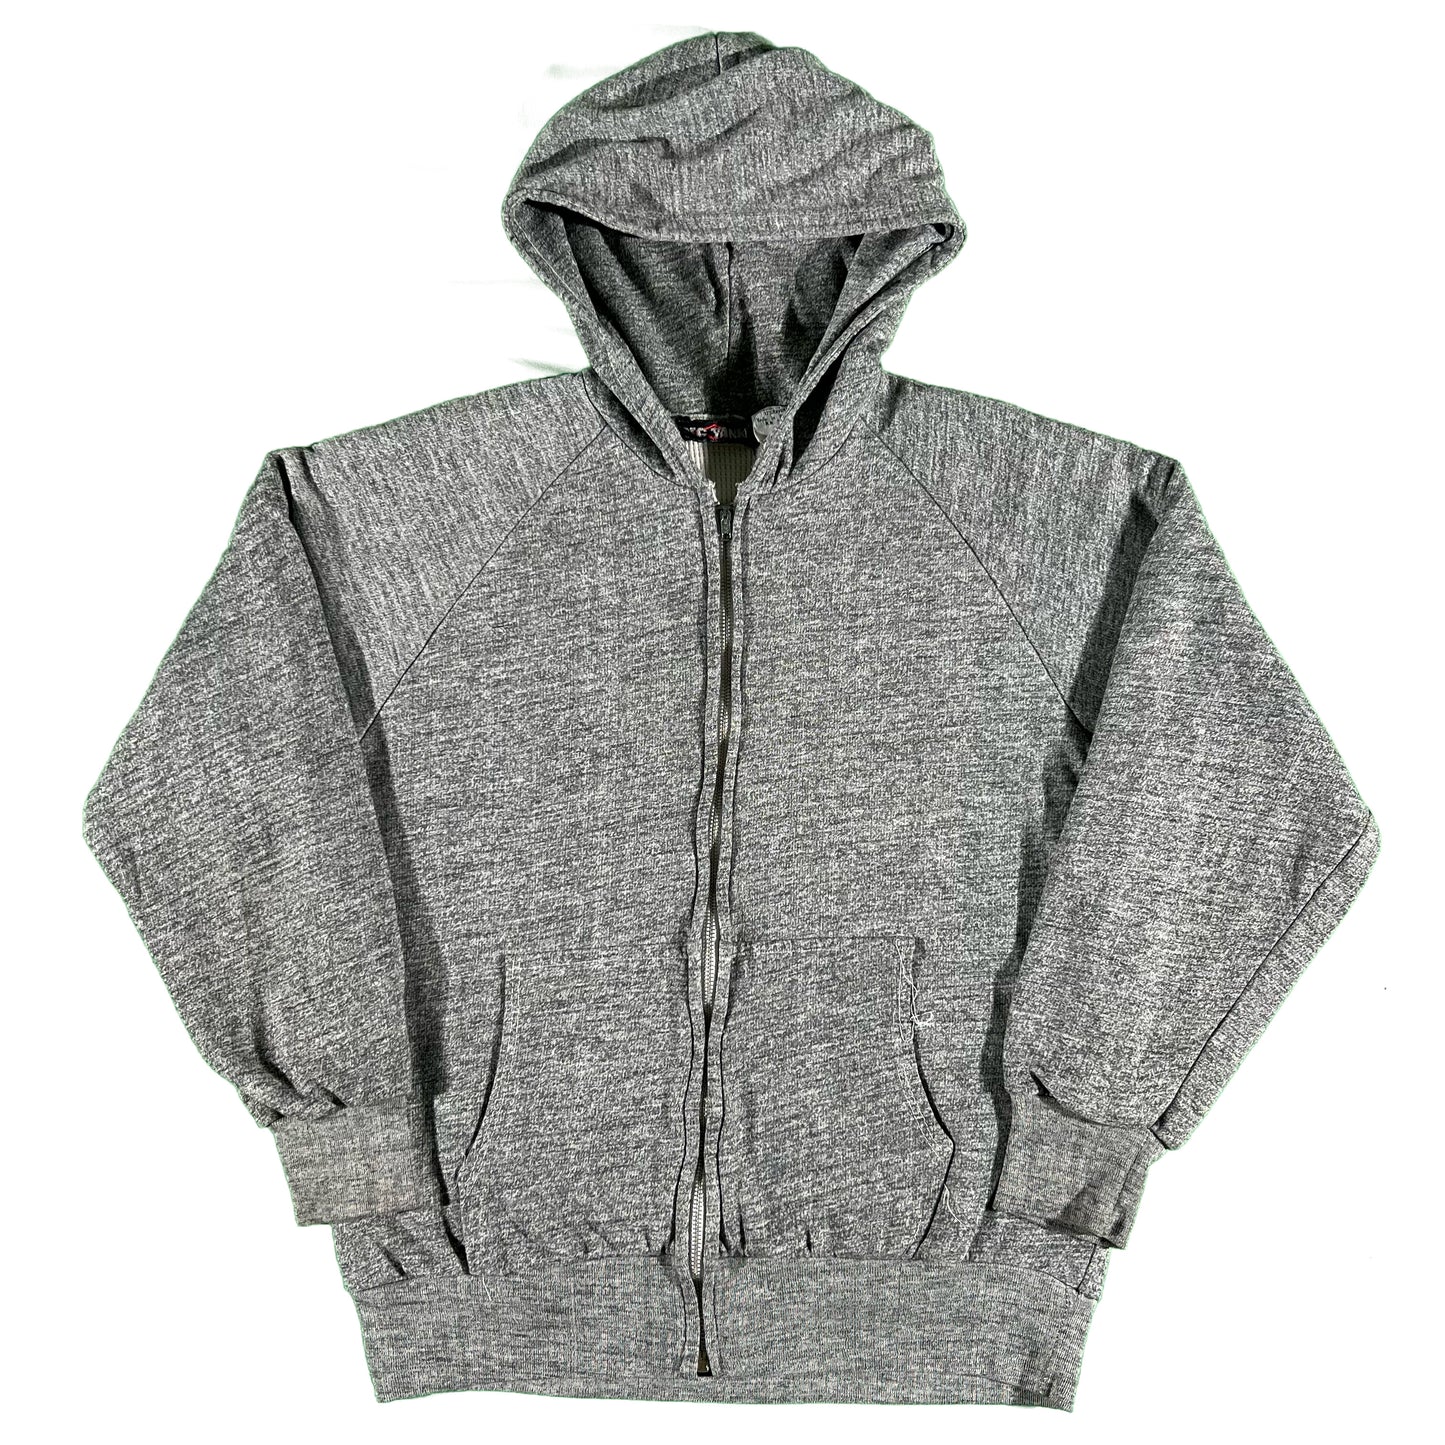 90s Grey Waffle Lined Zip Up Hoodie- M